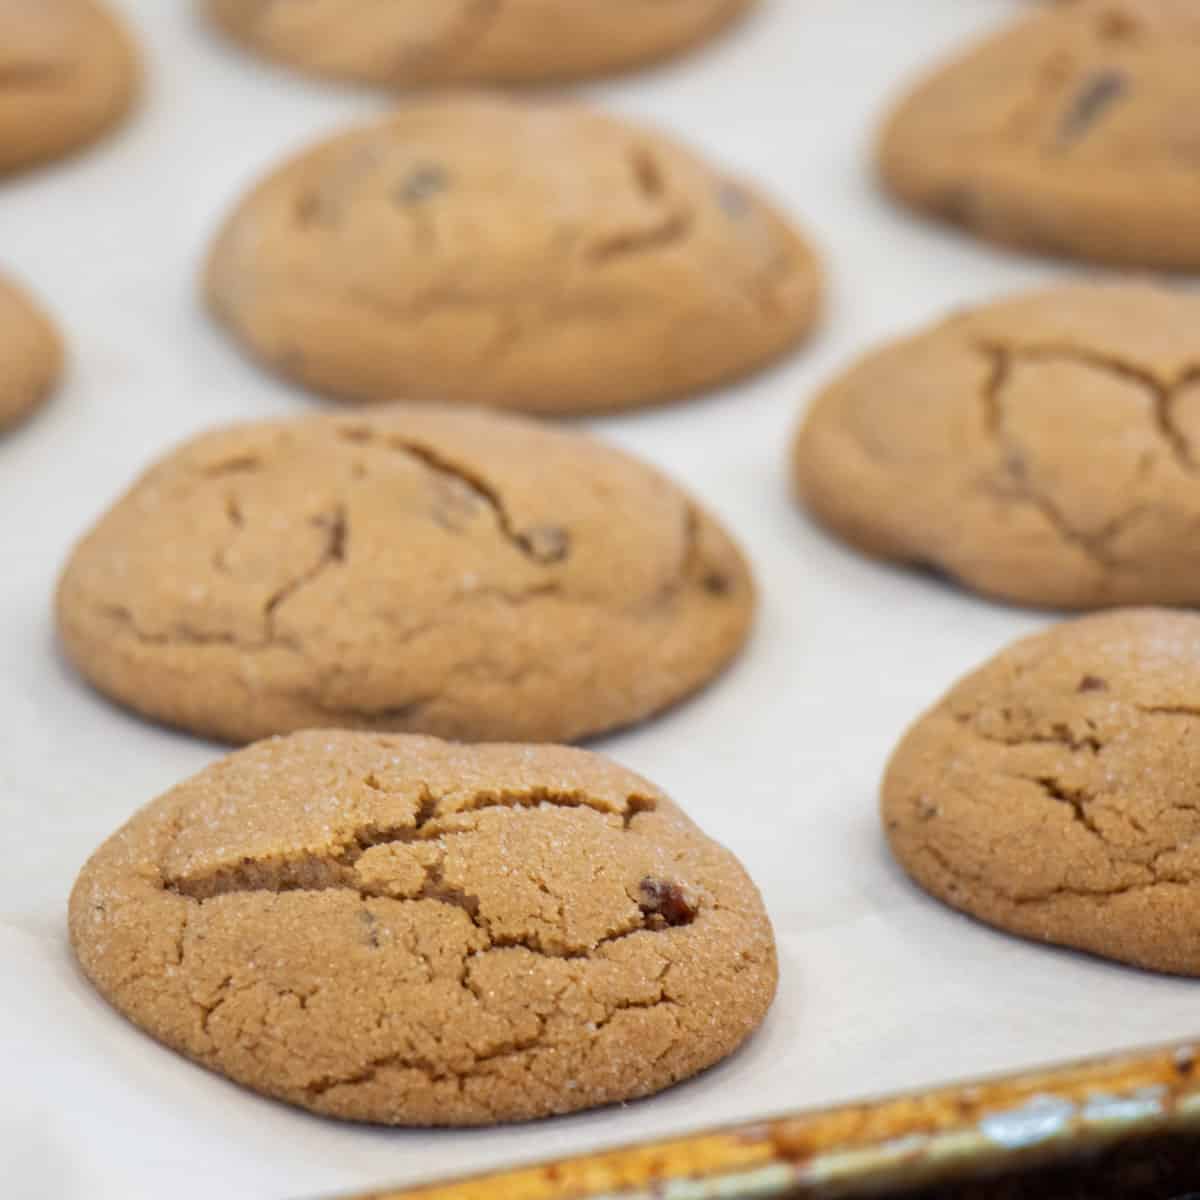 Fresh baked cookies on a baking sheet.